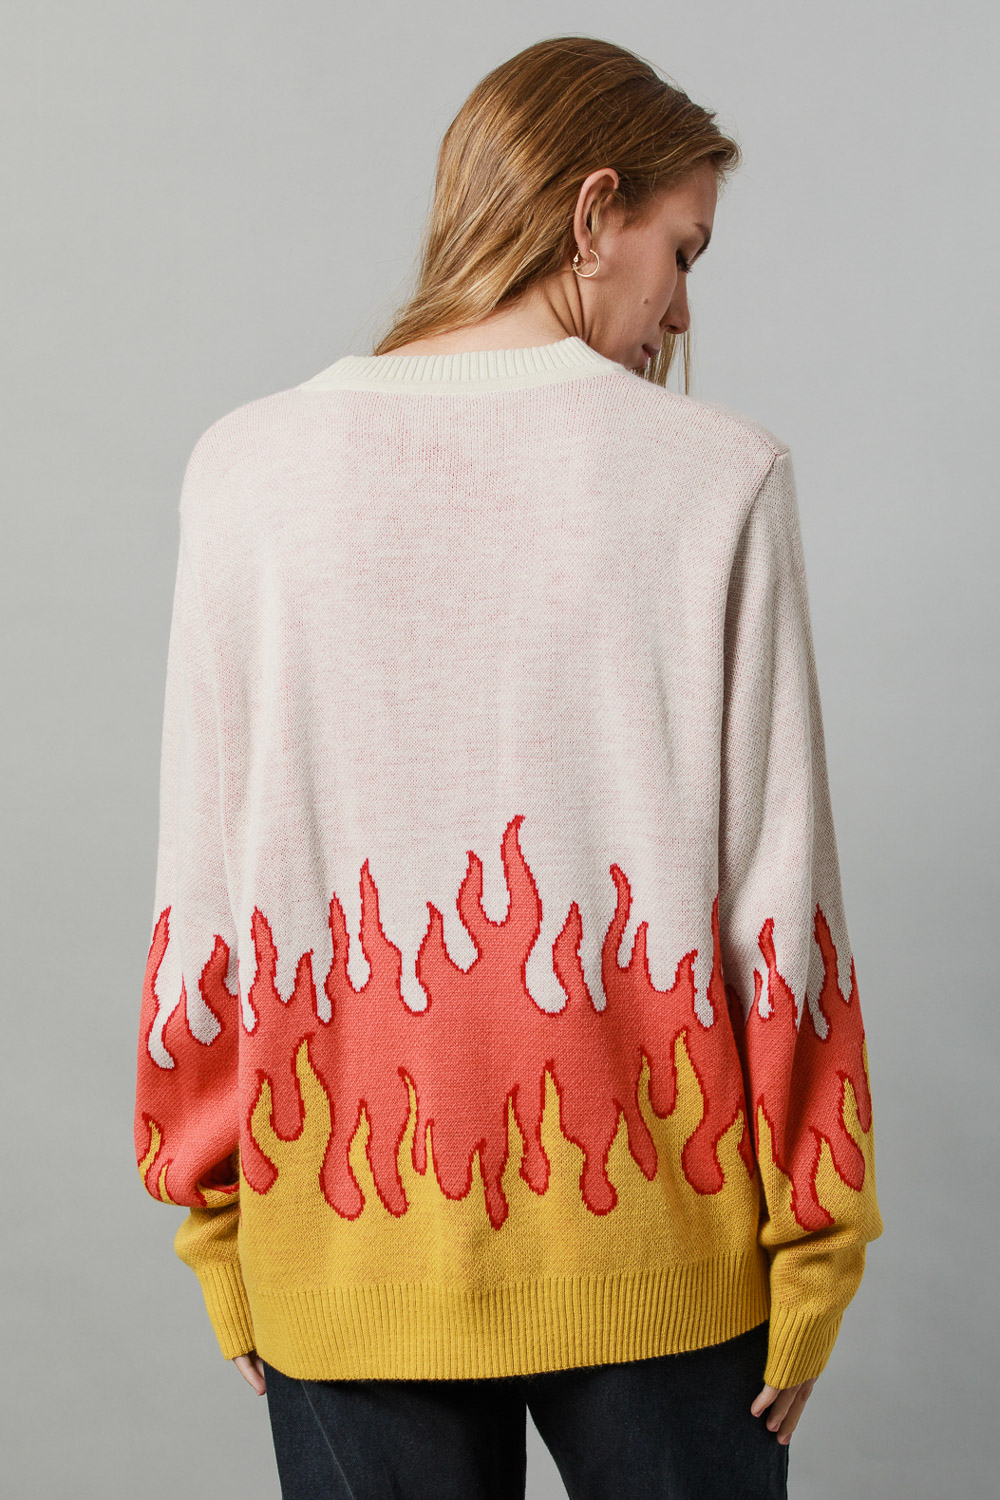 johnlcook_sweater-new-flames_11-30-2022__picture-8542